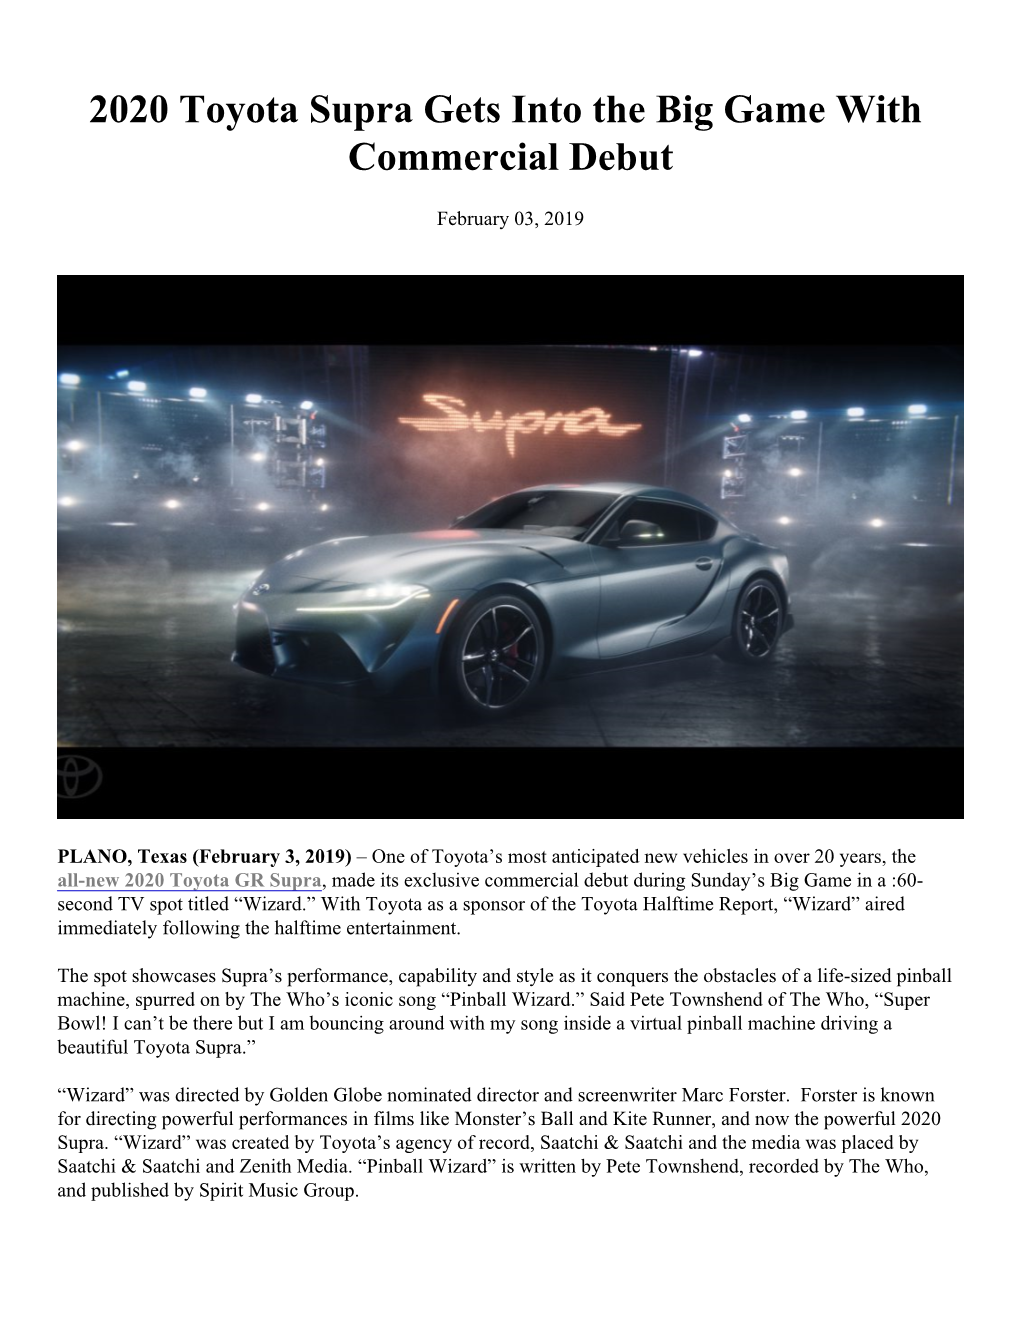 2020 Toyota Supra Gets Into the Big Game with Commercial Debut